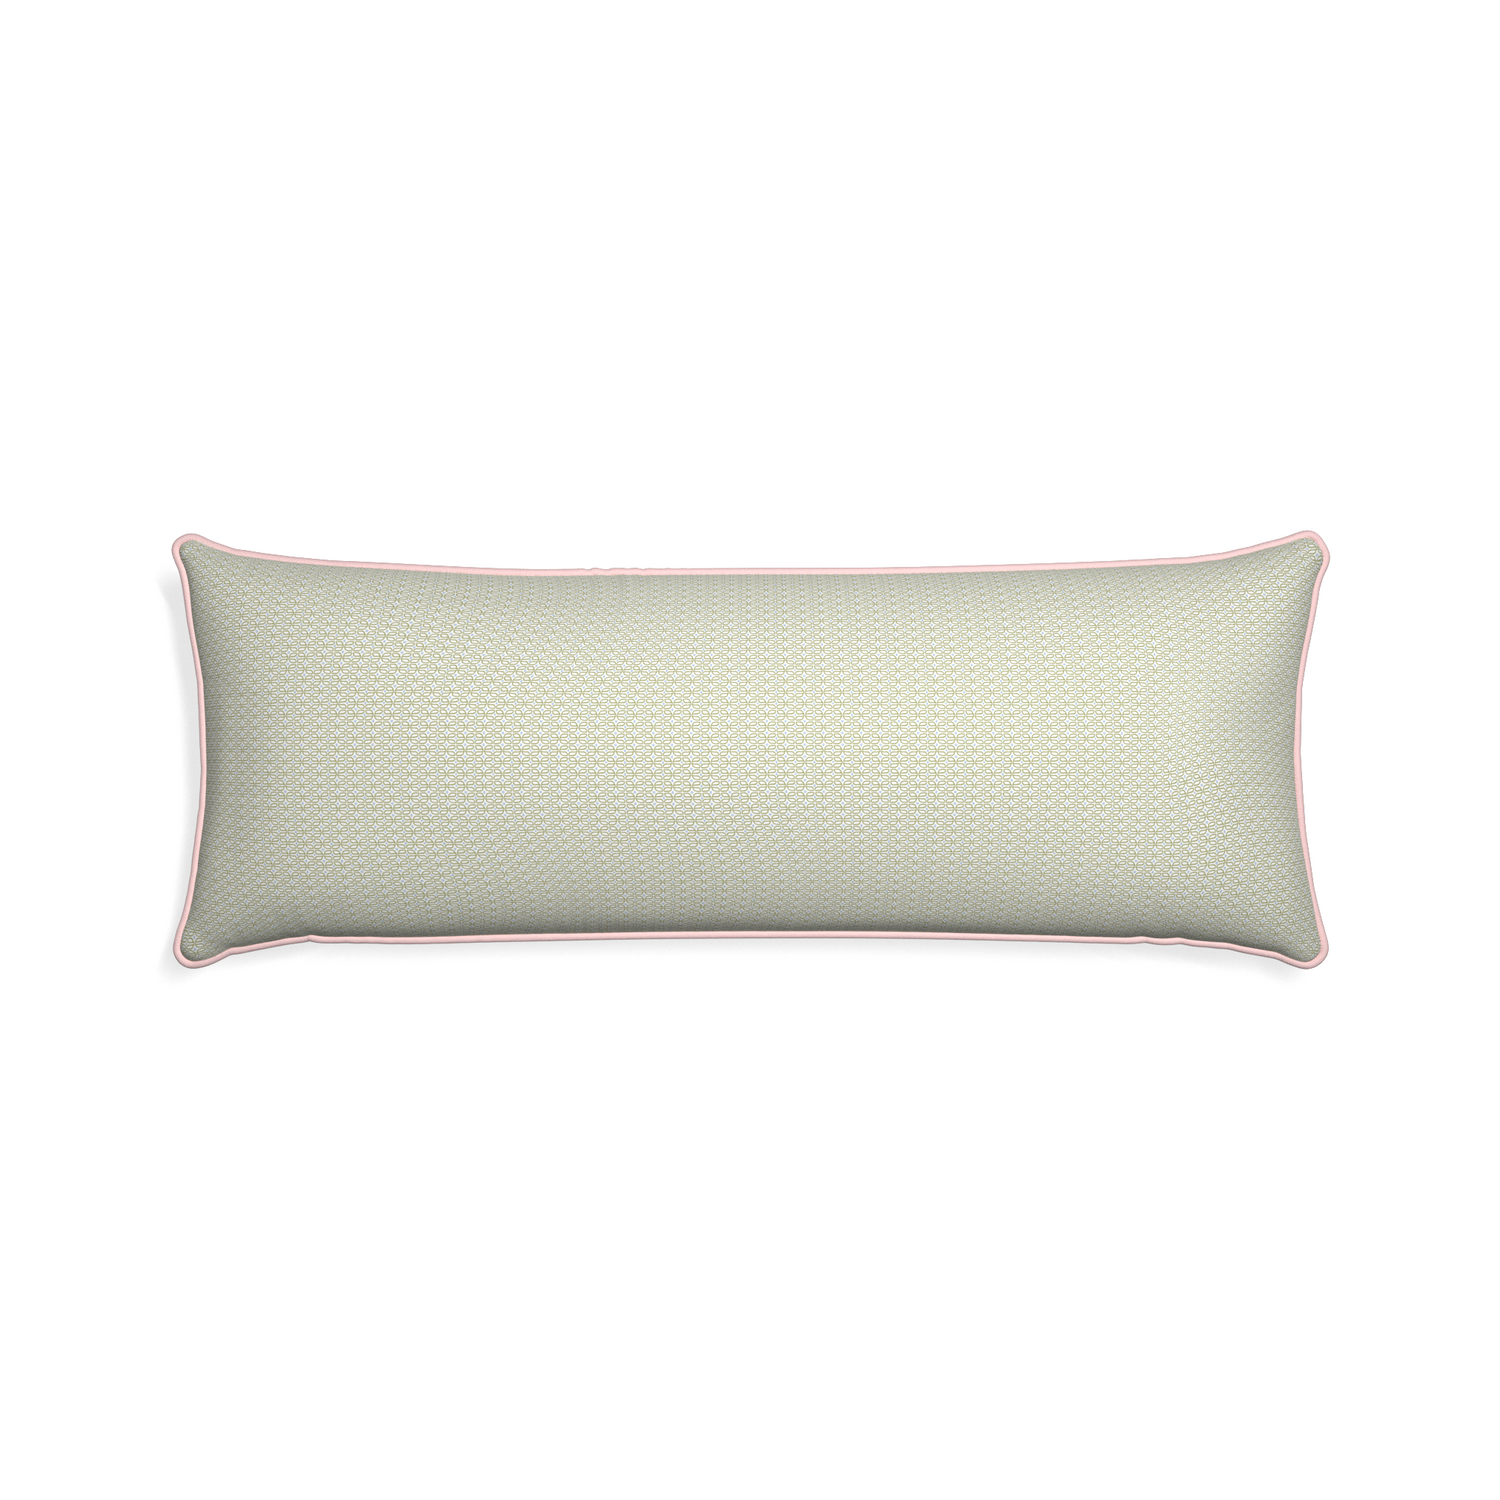 Xl-lumbar loomi moss custom moss green geometricpillow with petal piping on white background